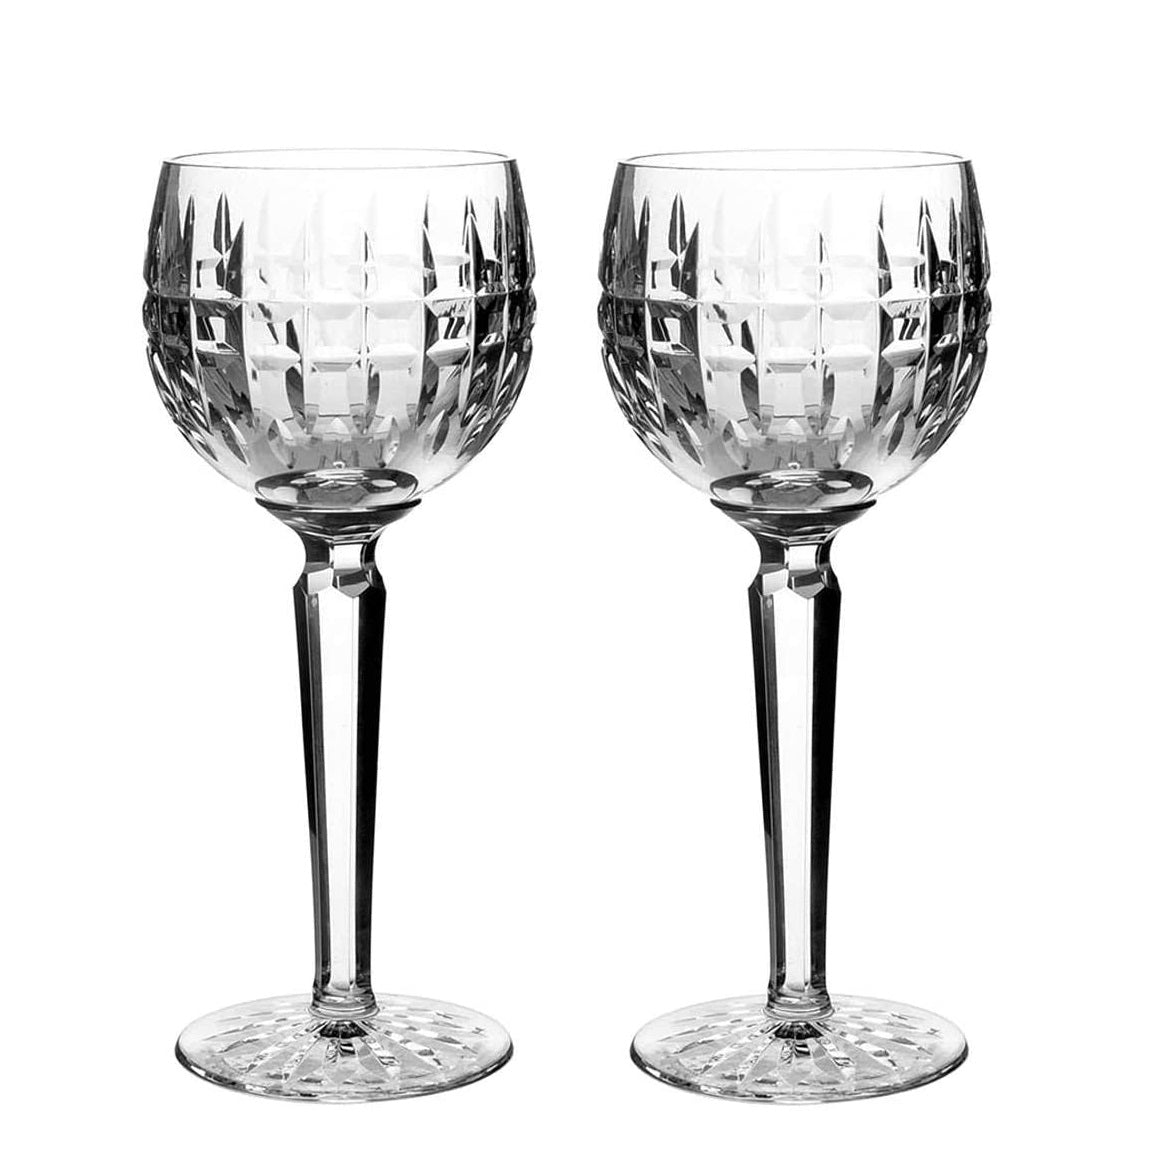 Waterford Crystal Glenmore Hock Pair  The Waterford Glenmore pattern is a stunning combination of brilliance and clarity. The intricate detailing of Glenmore's signature line cuts combine with the comforting weight of Waterford's hand-crafted fine crystal to produce a stunning piece of drinkware that defines traditional styling even while transcending it.